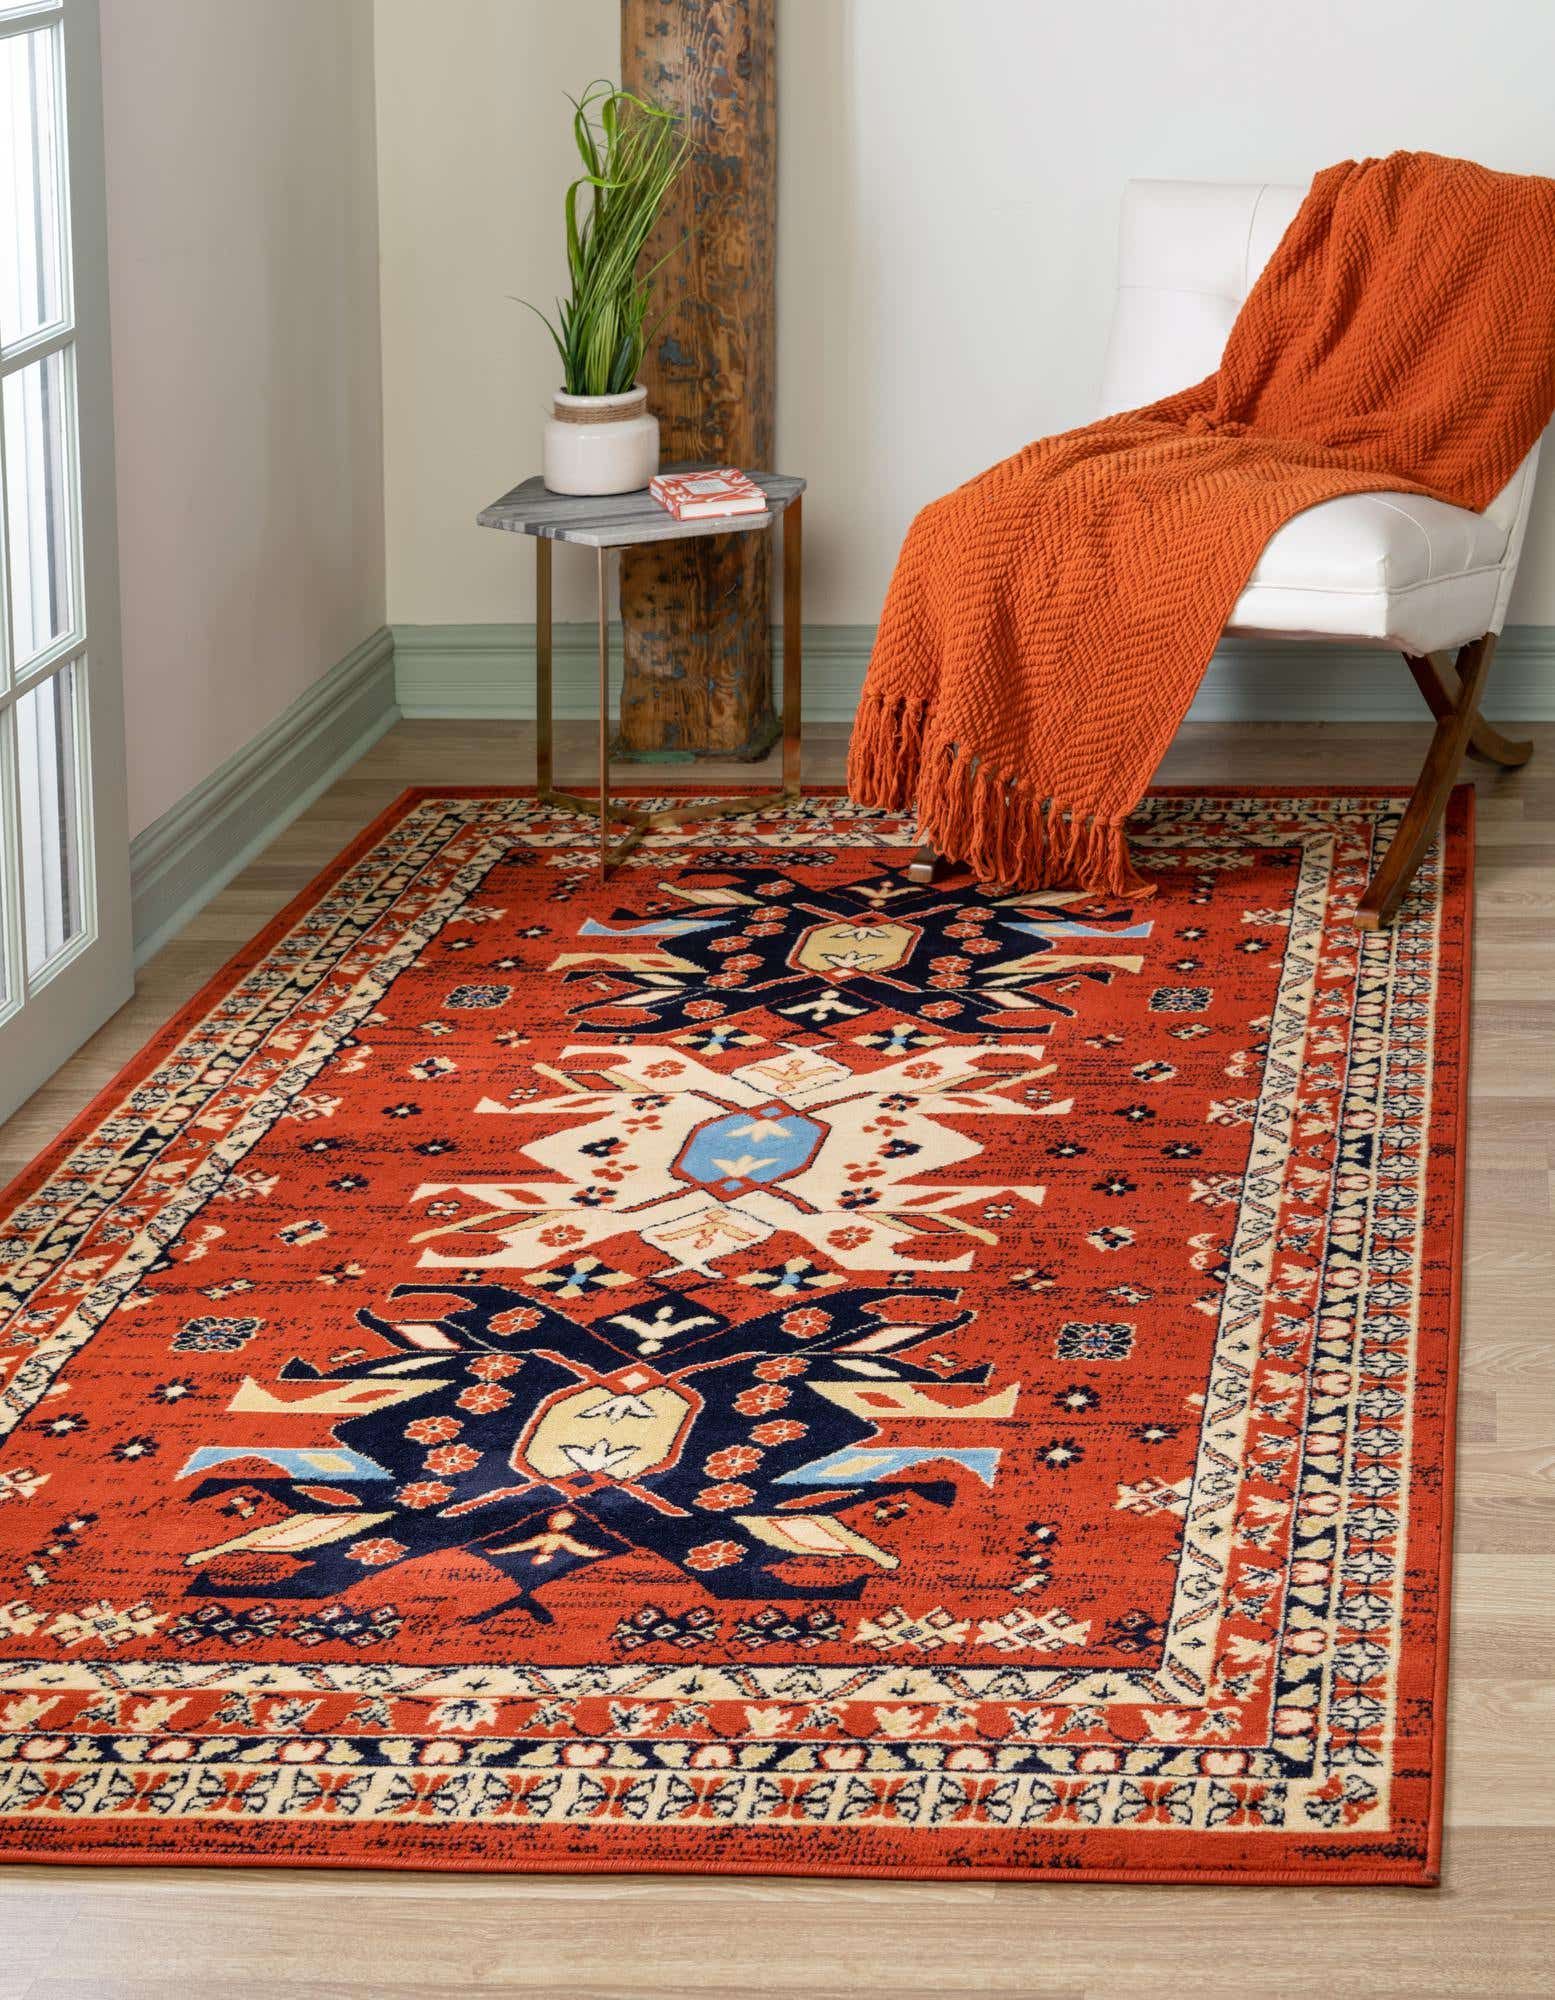 SMALL EXTRA LARGE RUNNER CARPET TRADITIONAL RUGS LOW PRICE DISCOUNT BUDGET RUGS 